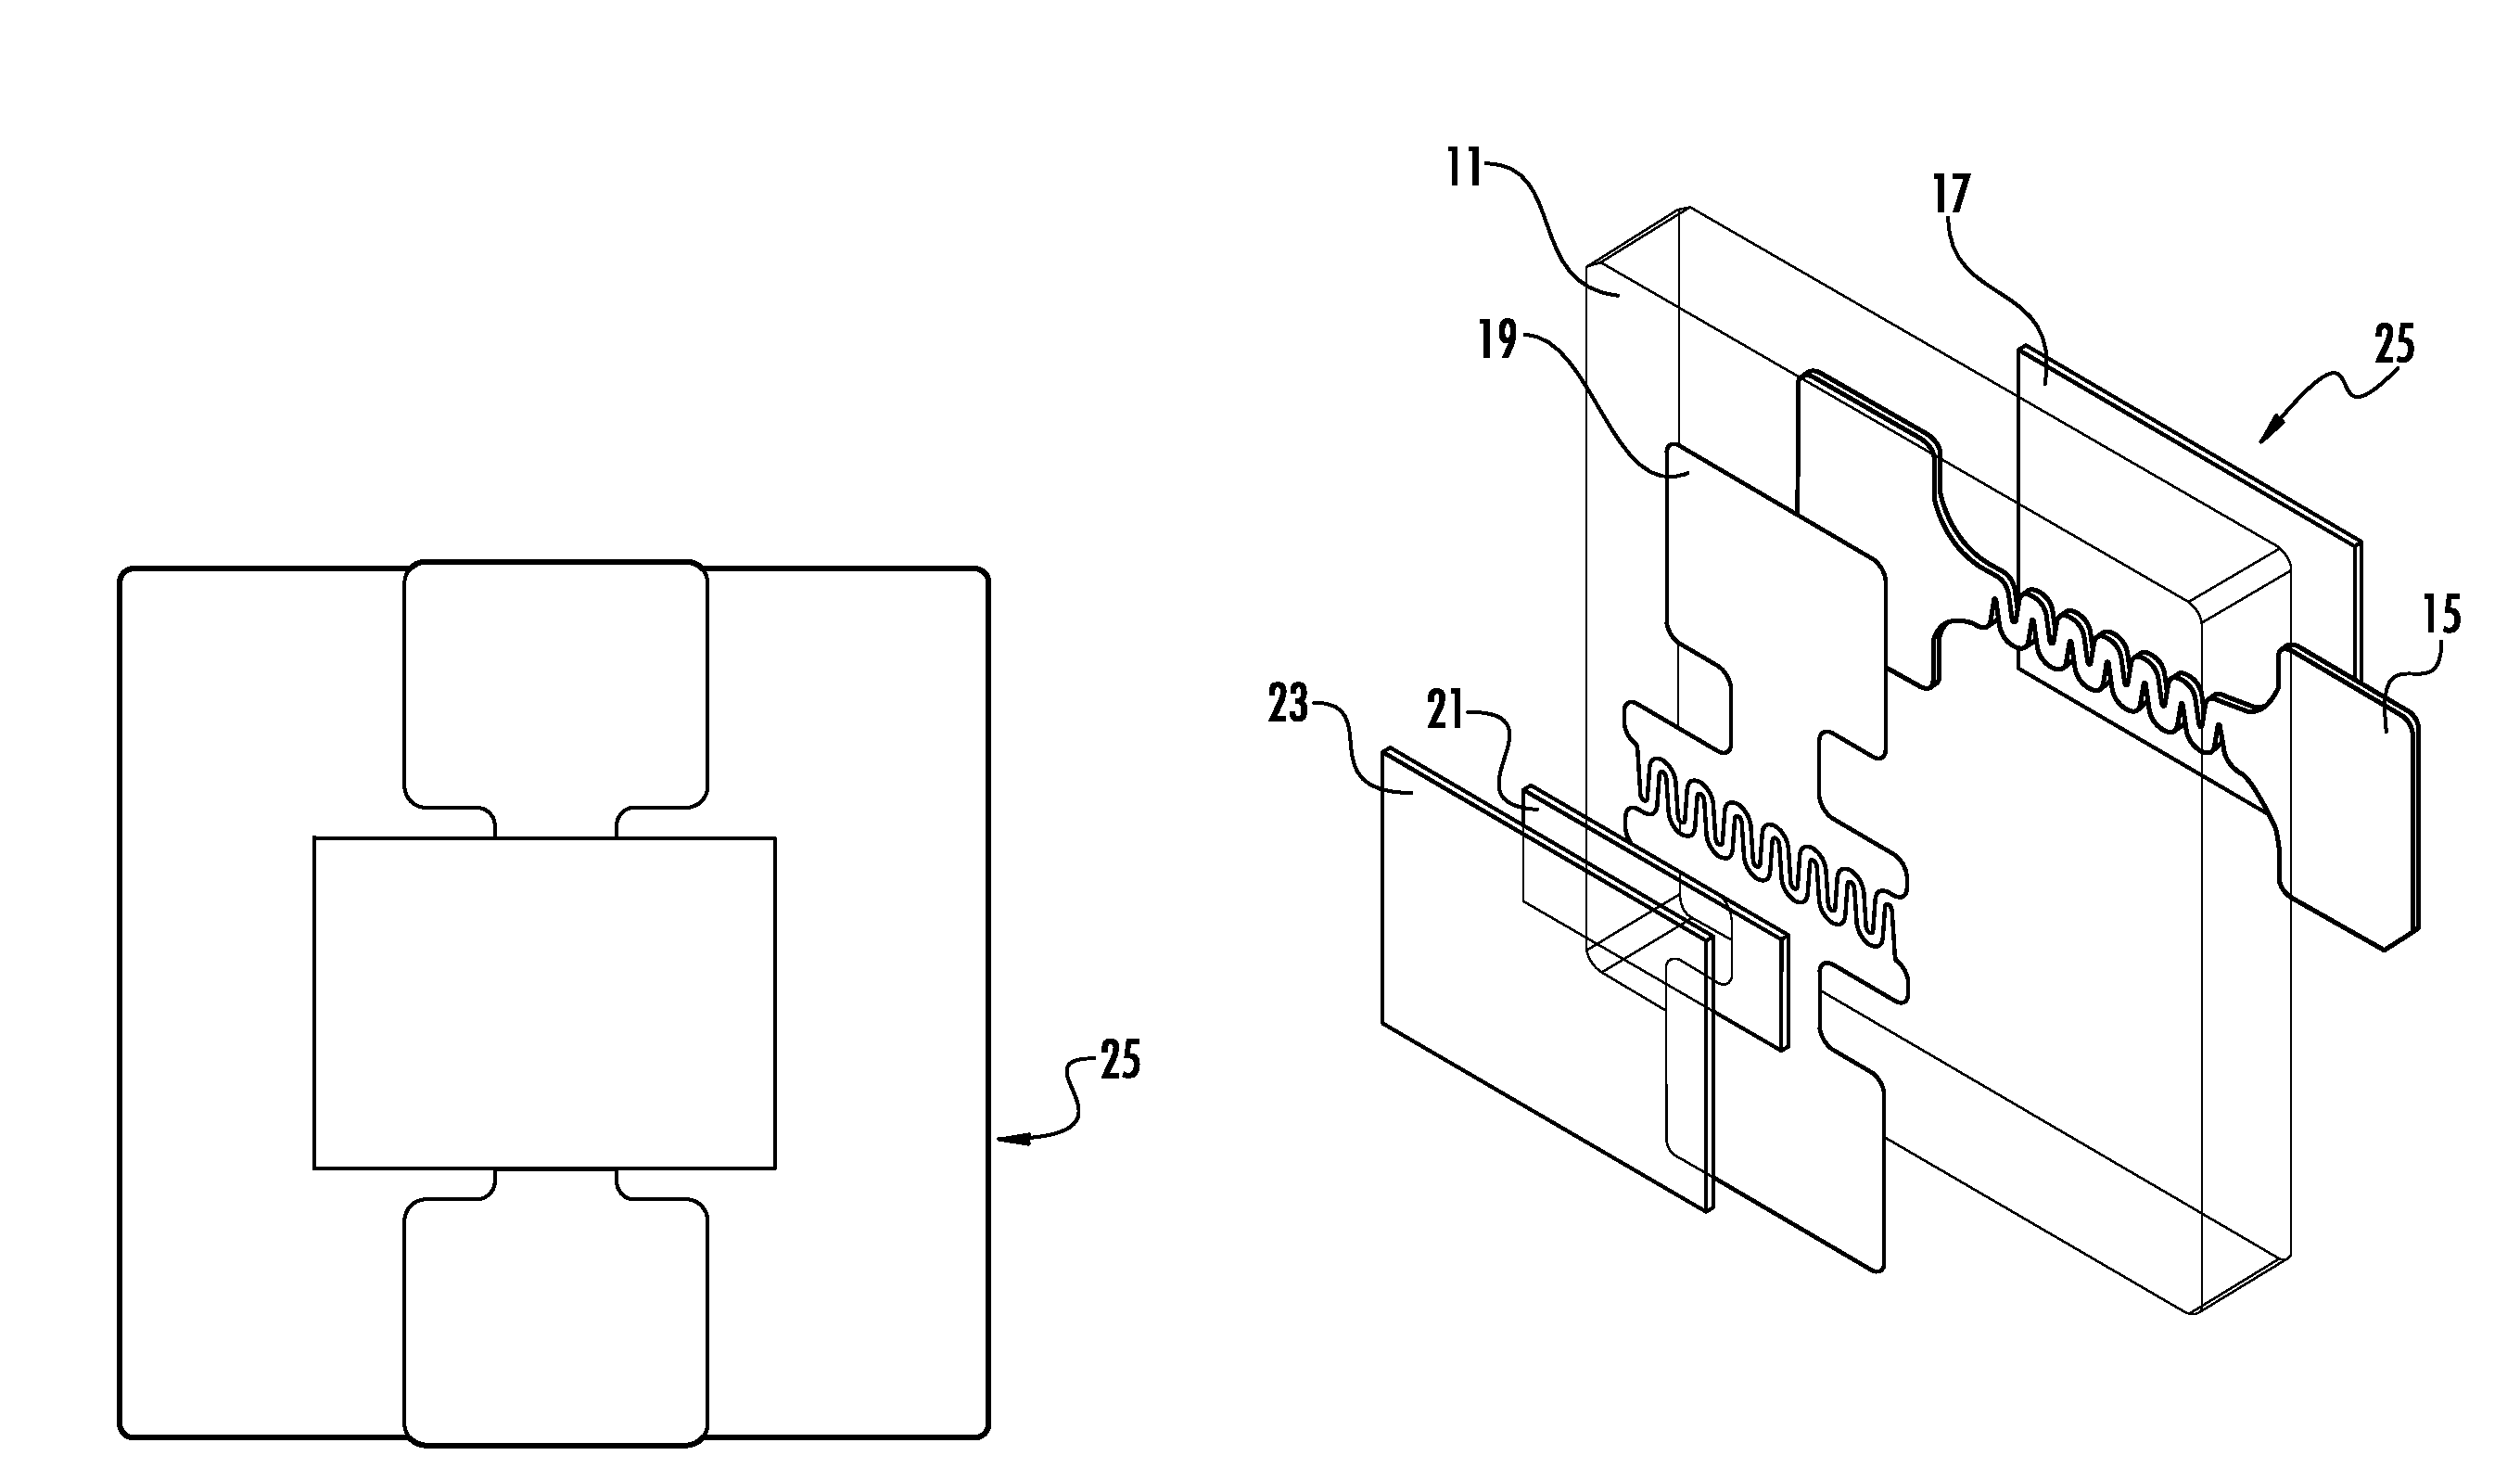 Method for Producing a Subminiature "Micro-Chip" Oxygen Sensor for Control of Internal Combustion Engines or Other Combustion Processes, Oxygen Sensor and an Exhaust Safety Switch